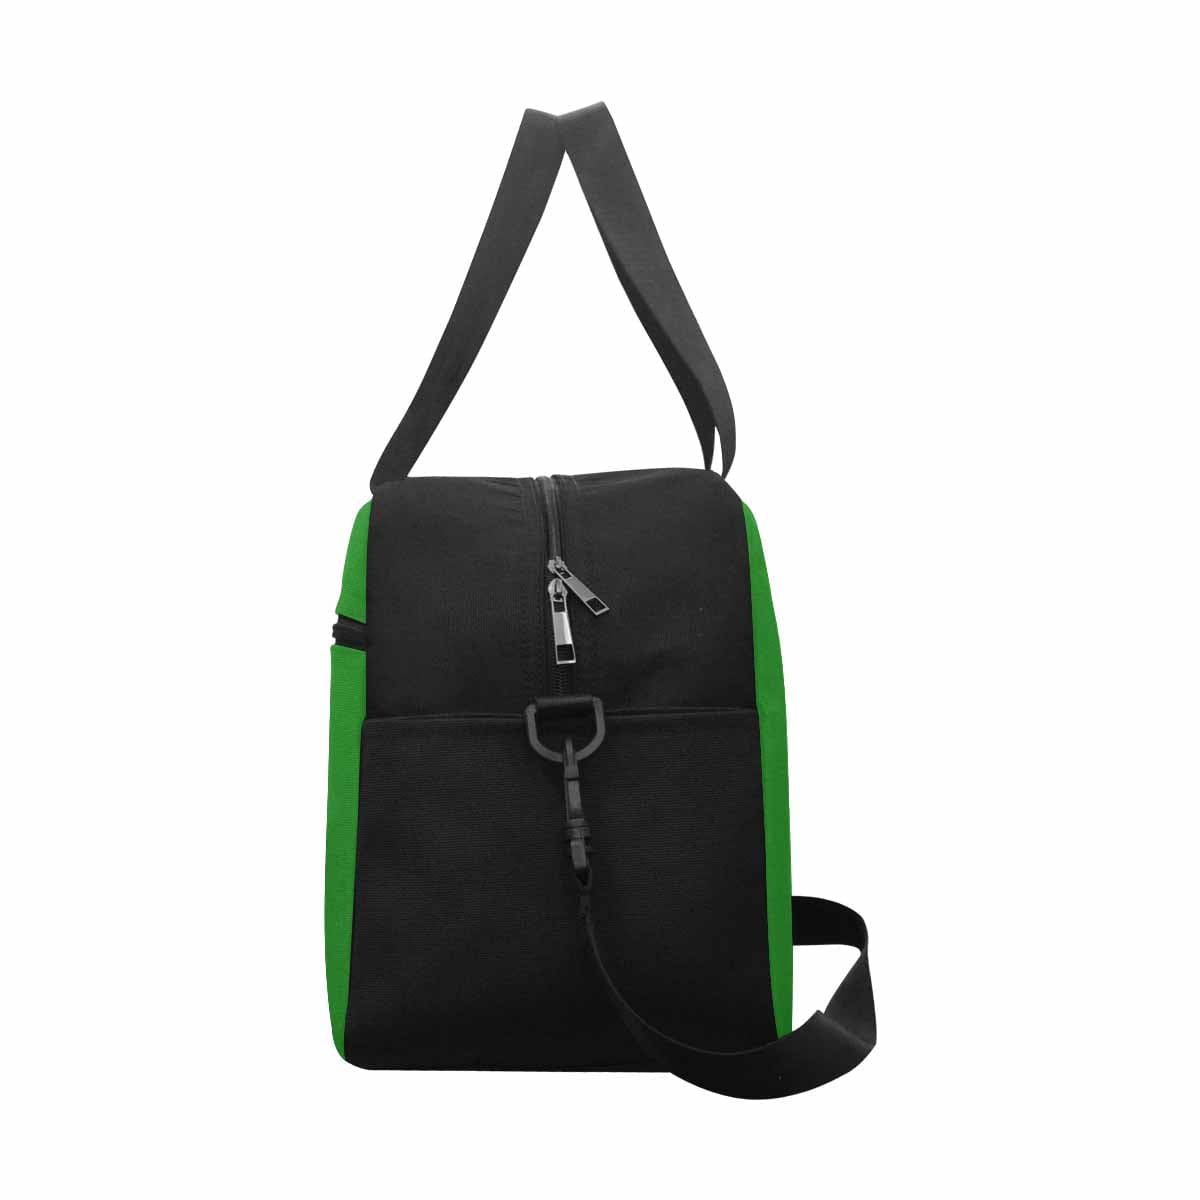 Forest Green Tote And Crossbody Travel Bag - Bags | Travel Bags | Crossbody